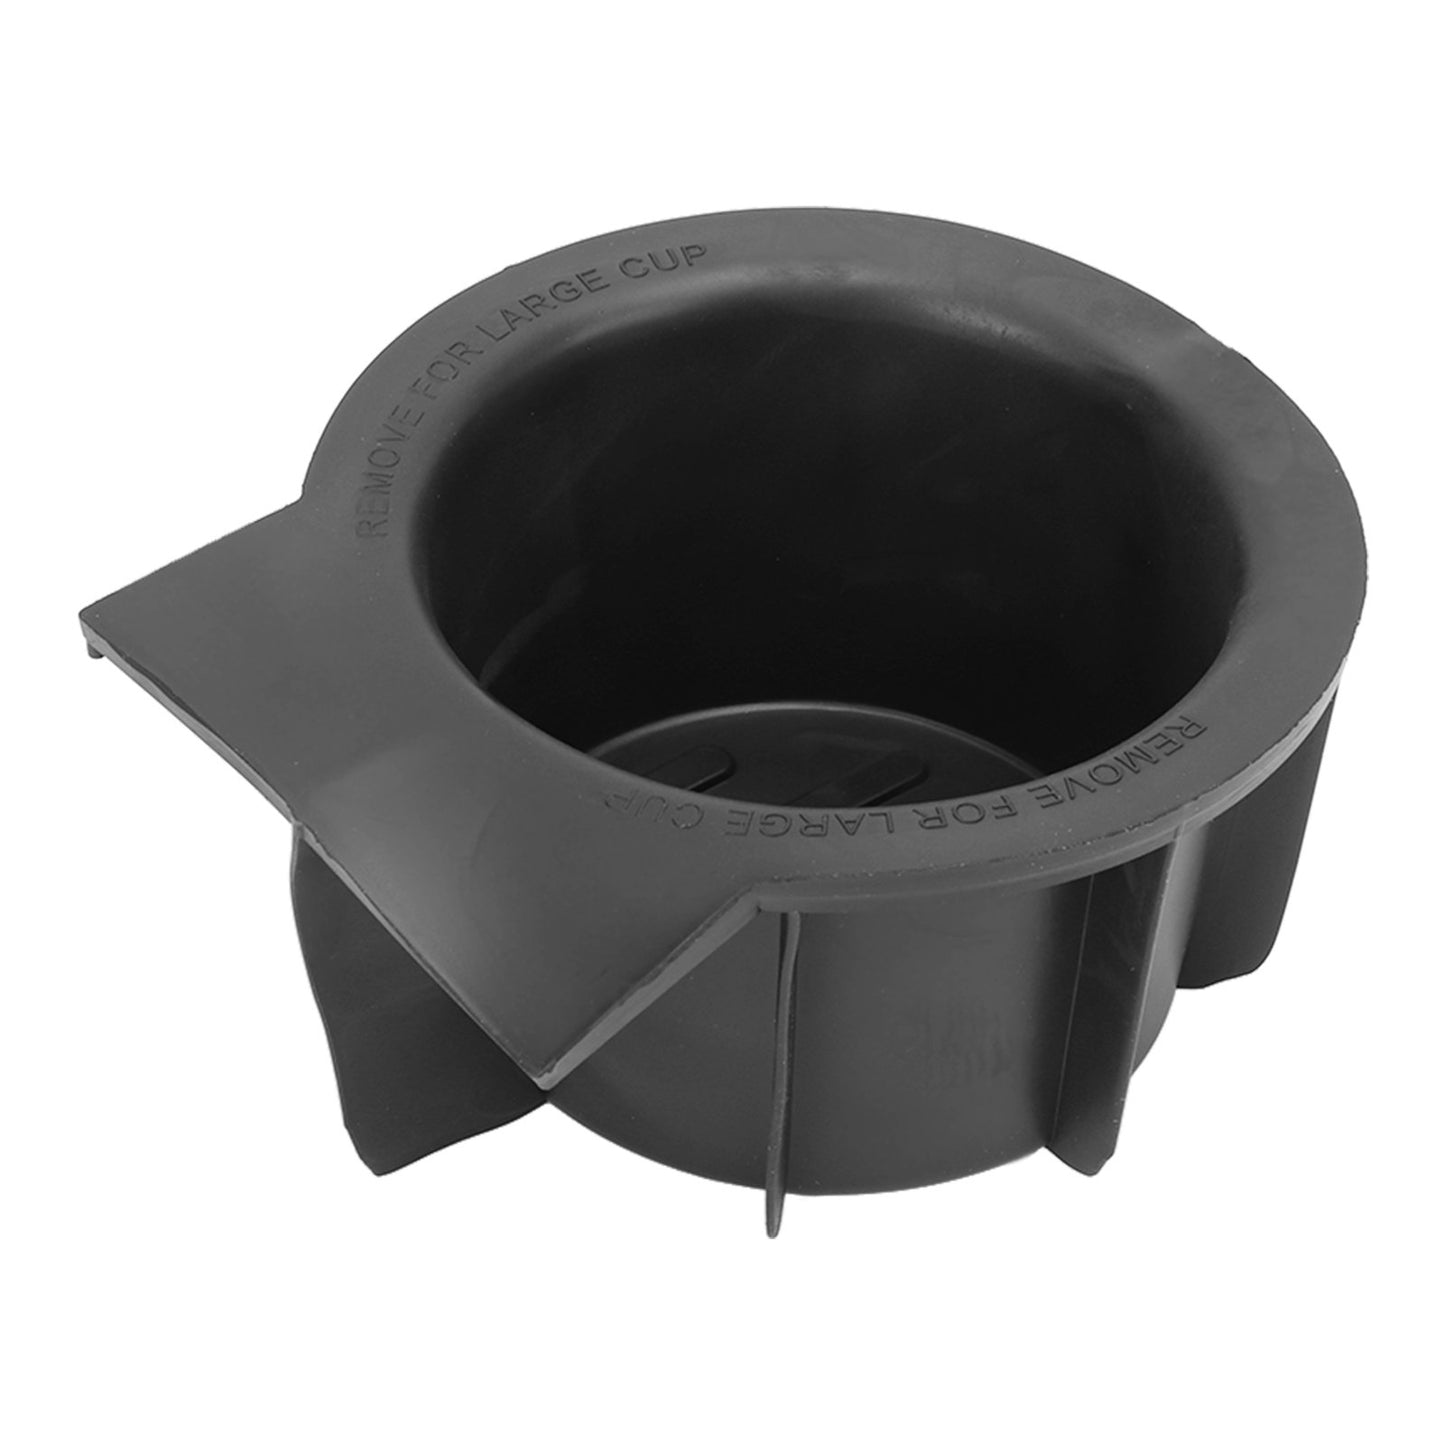 Cup Holder Inserts for Vehicles